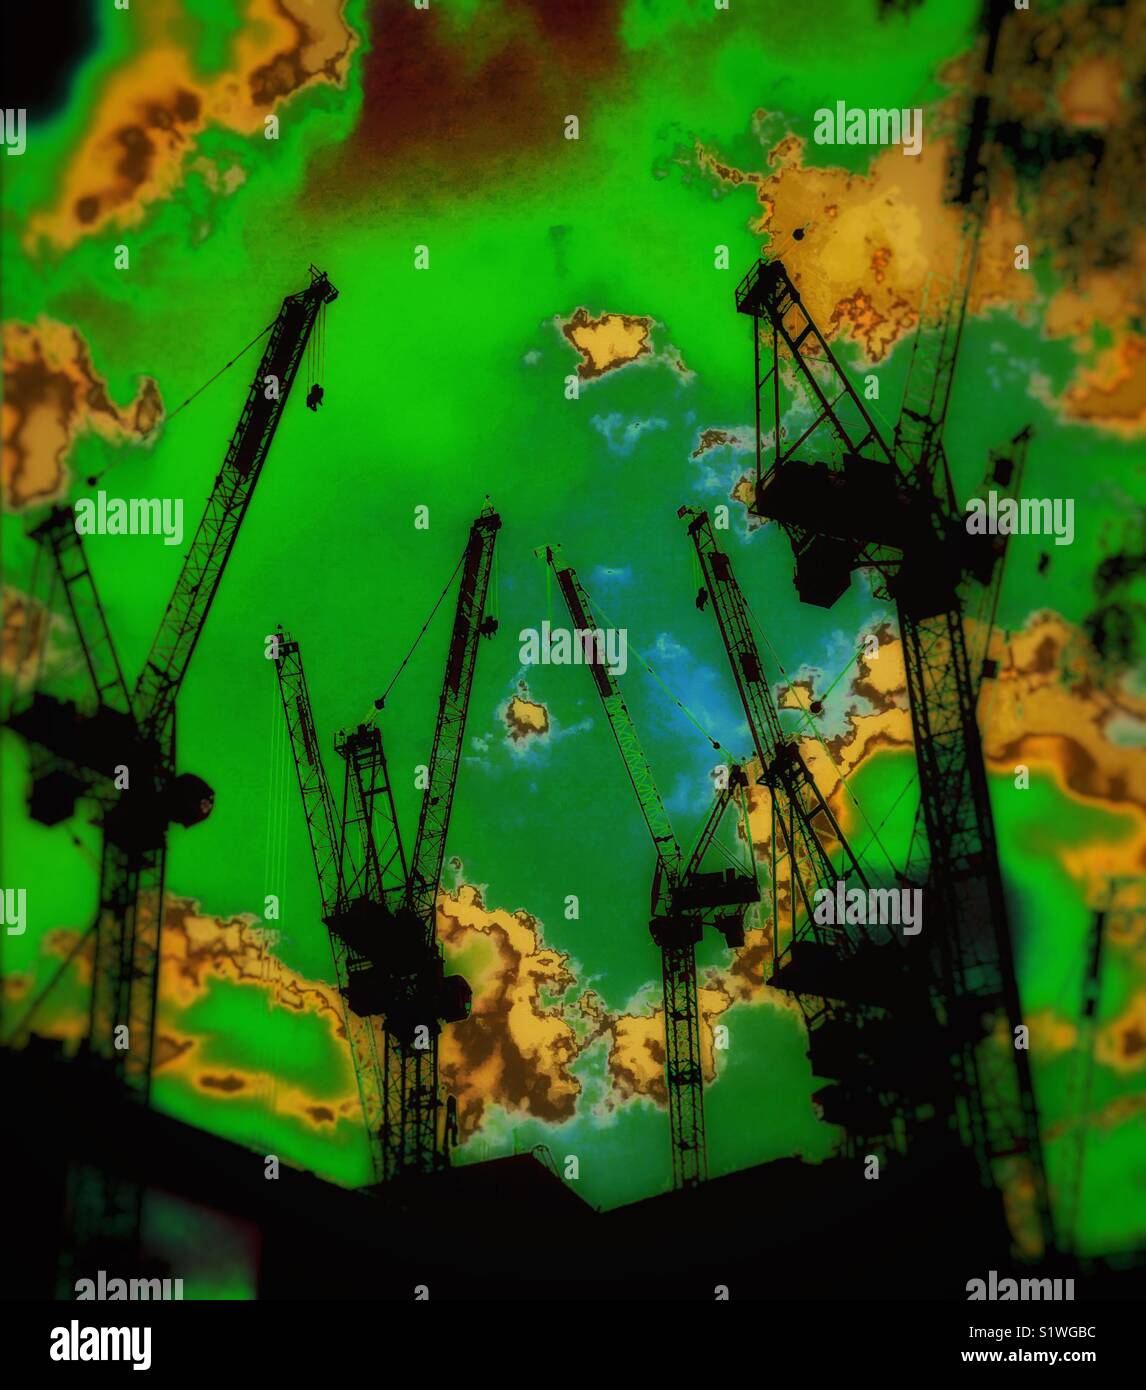 Artistic rendering of a sea of cranes towering upwards into a surreal green sky Stock Photo